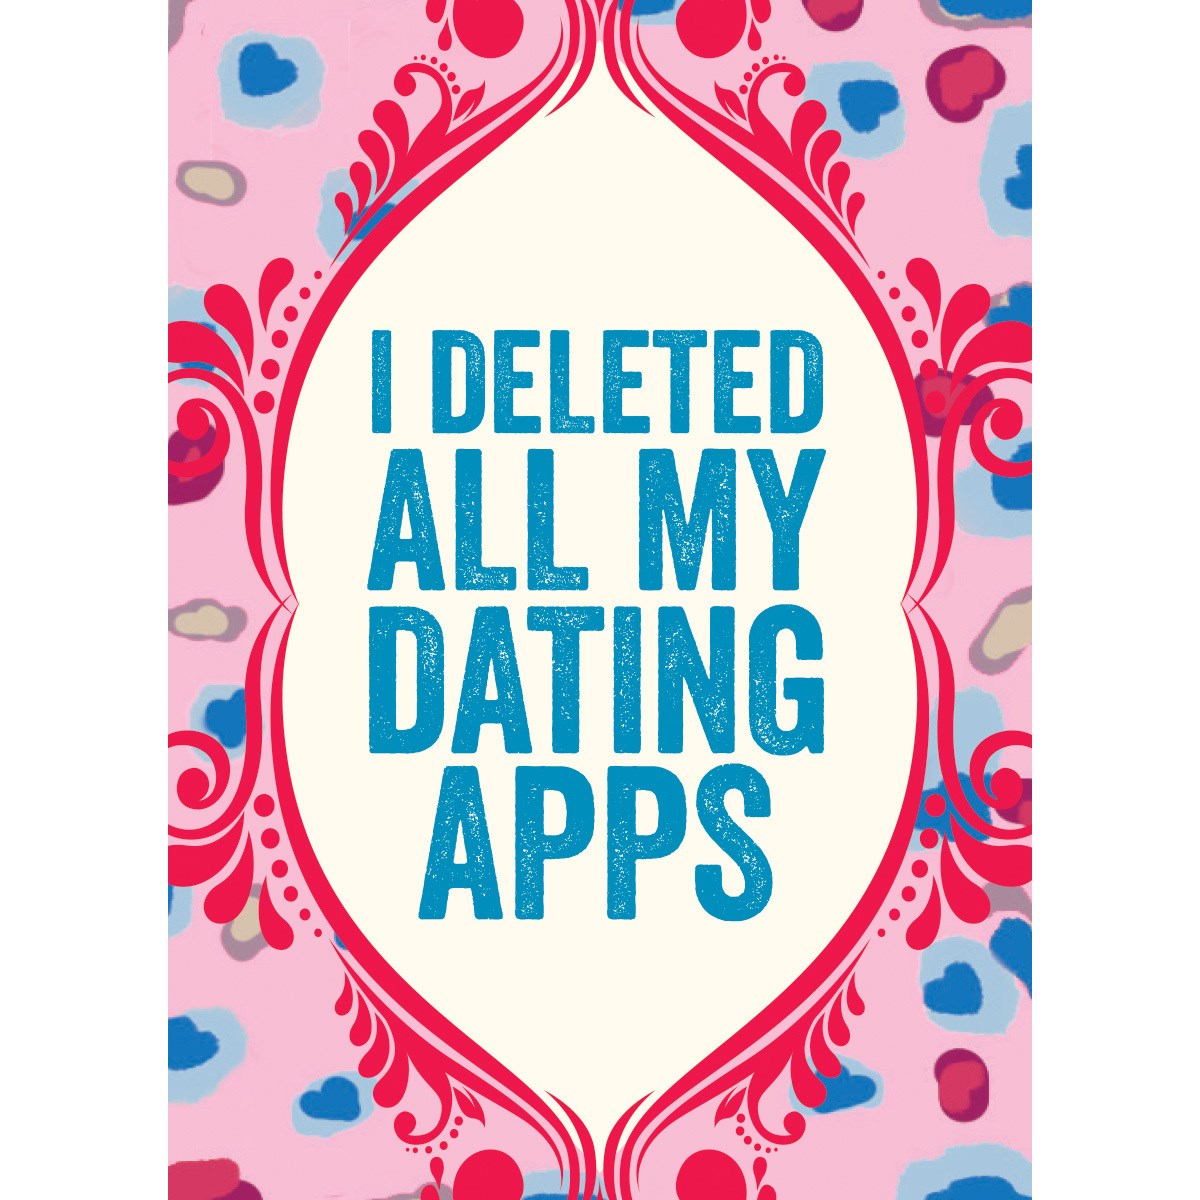 Dating Apps - Greeting Card